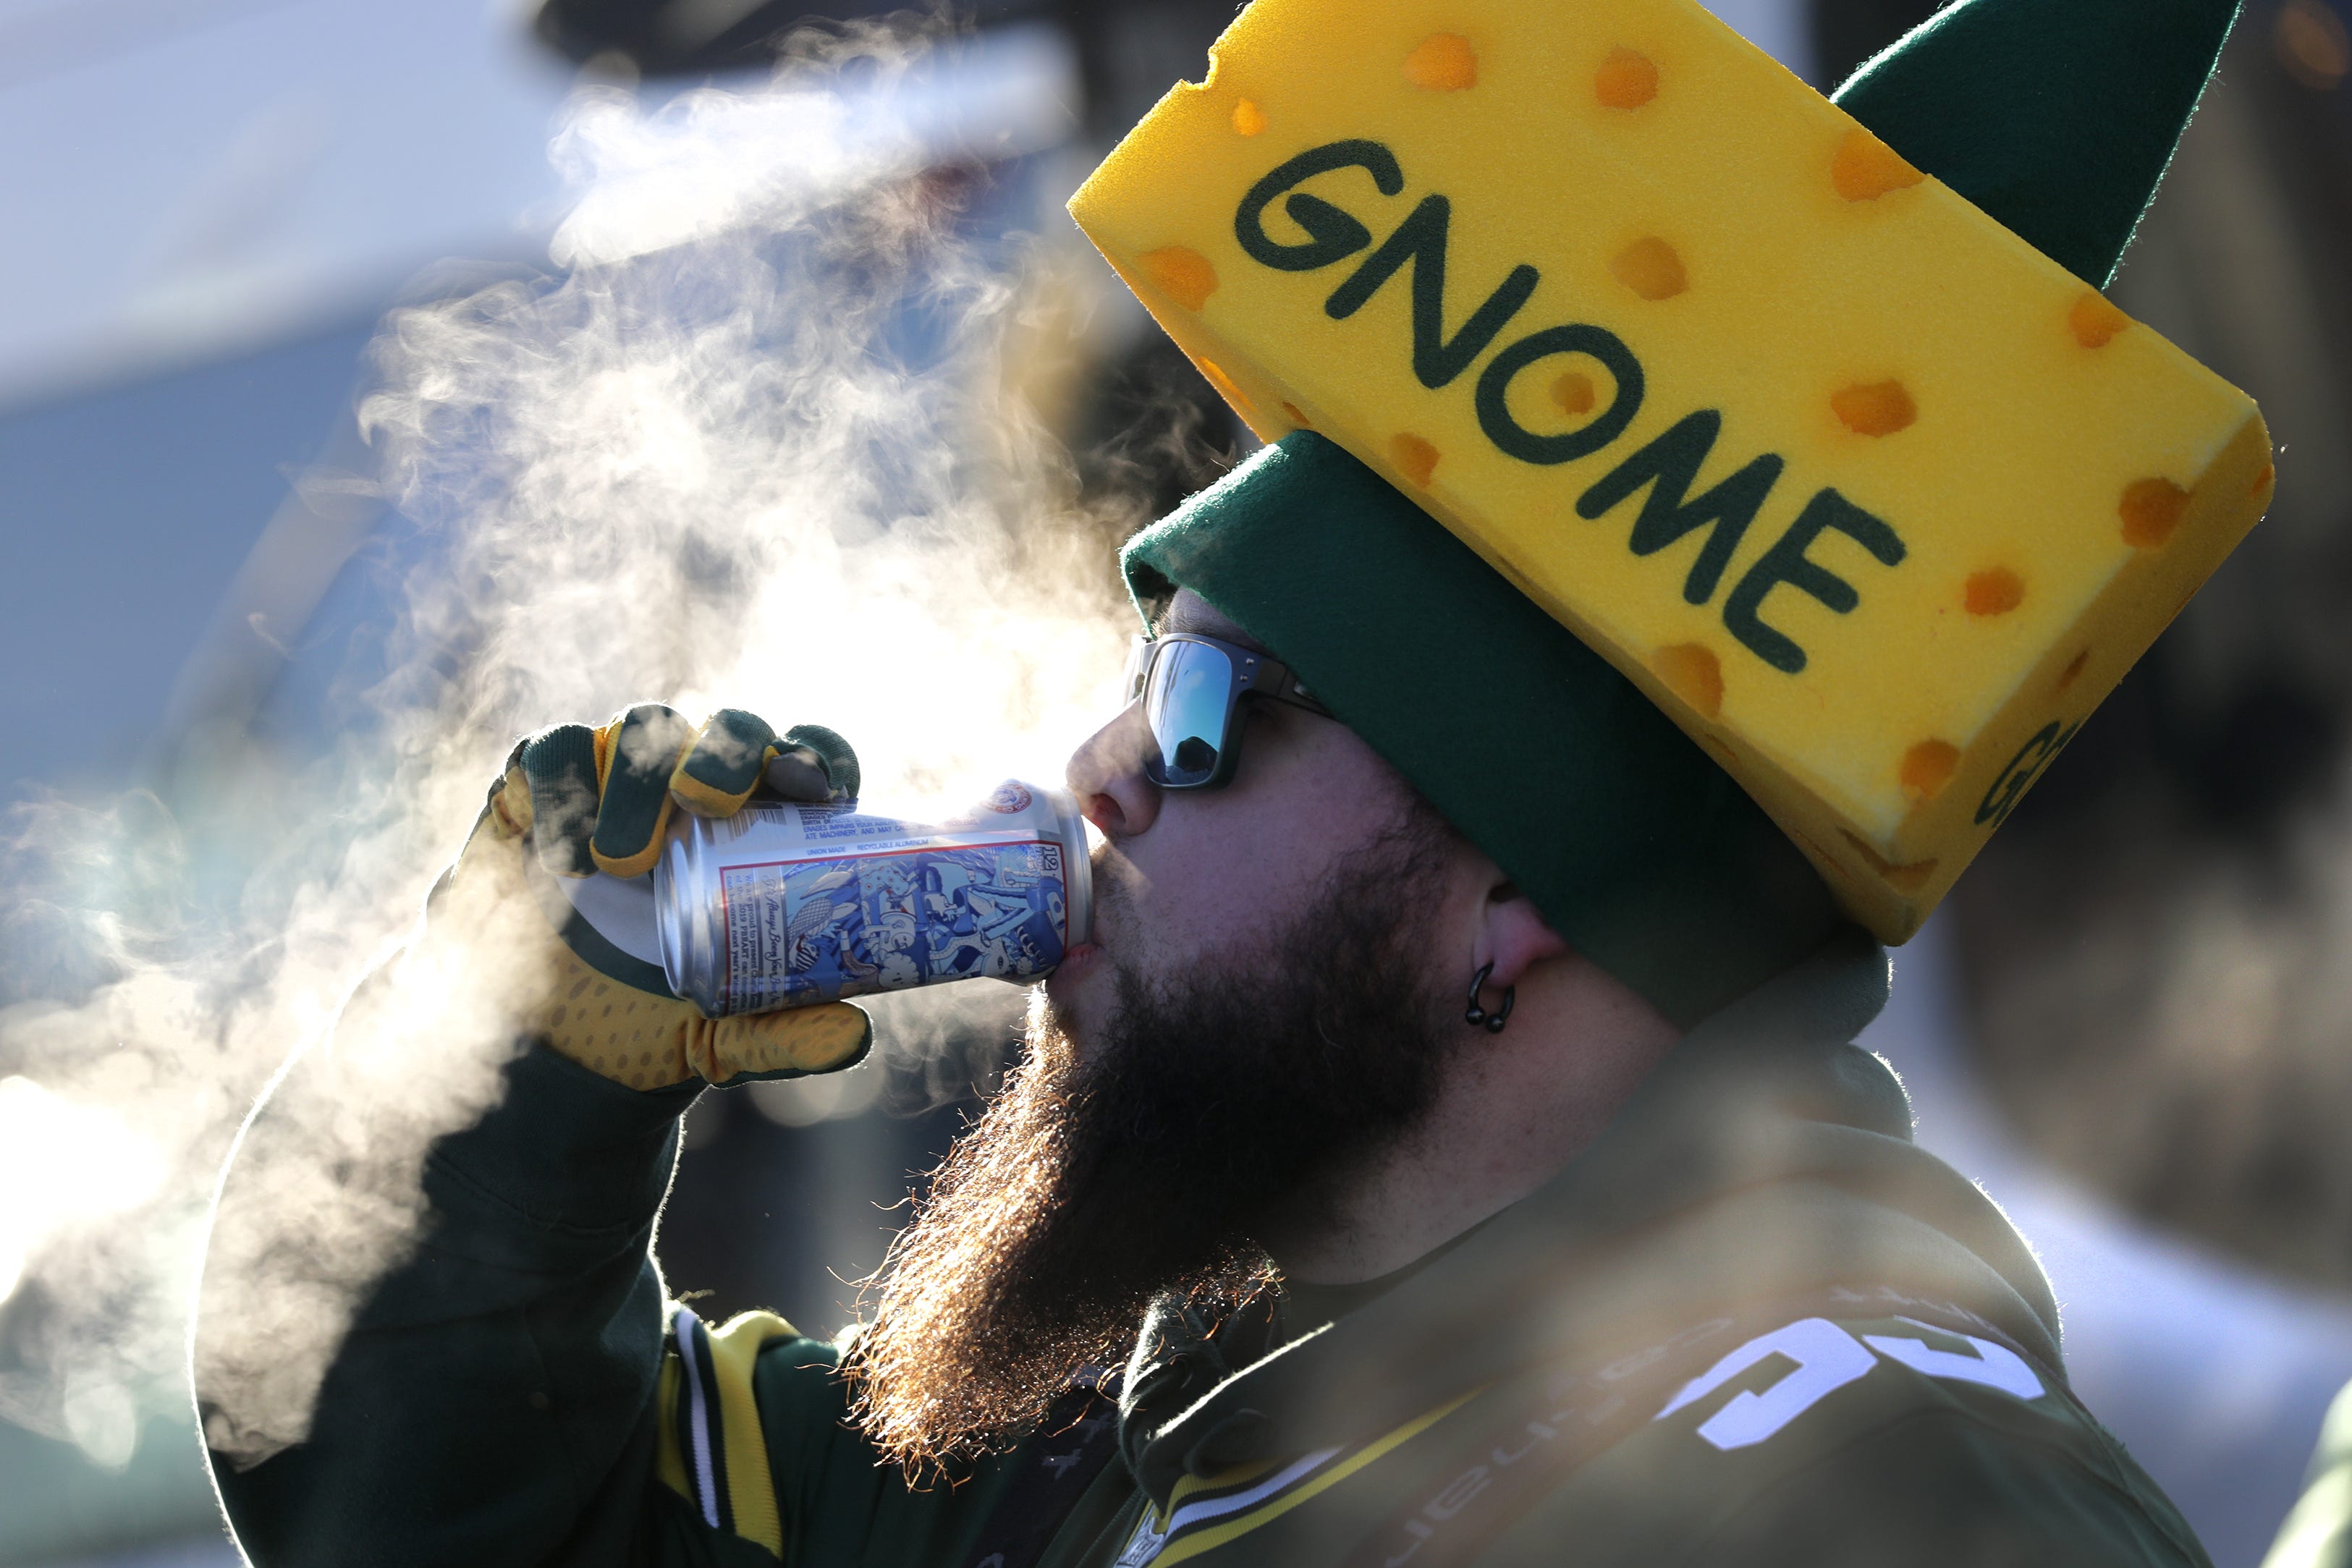 Chris St. Amour of Green Bay braves the cold to enjoy a beverage while tailgating before the Green Bay Packers play against the Chicago Bears Sunday, December 15, 2019, at Lambeau Field in Green Bay, Wis.